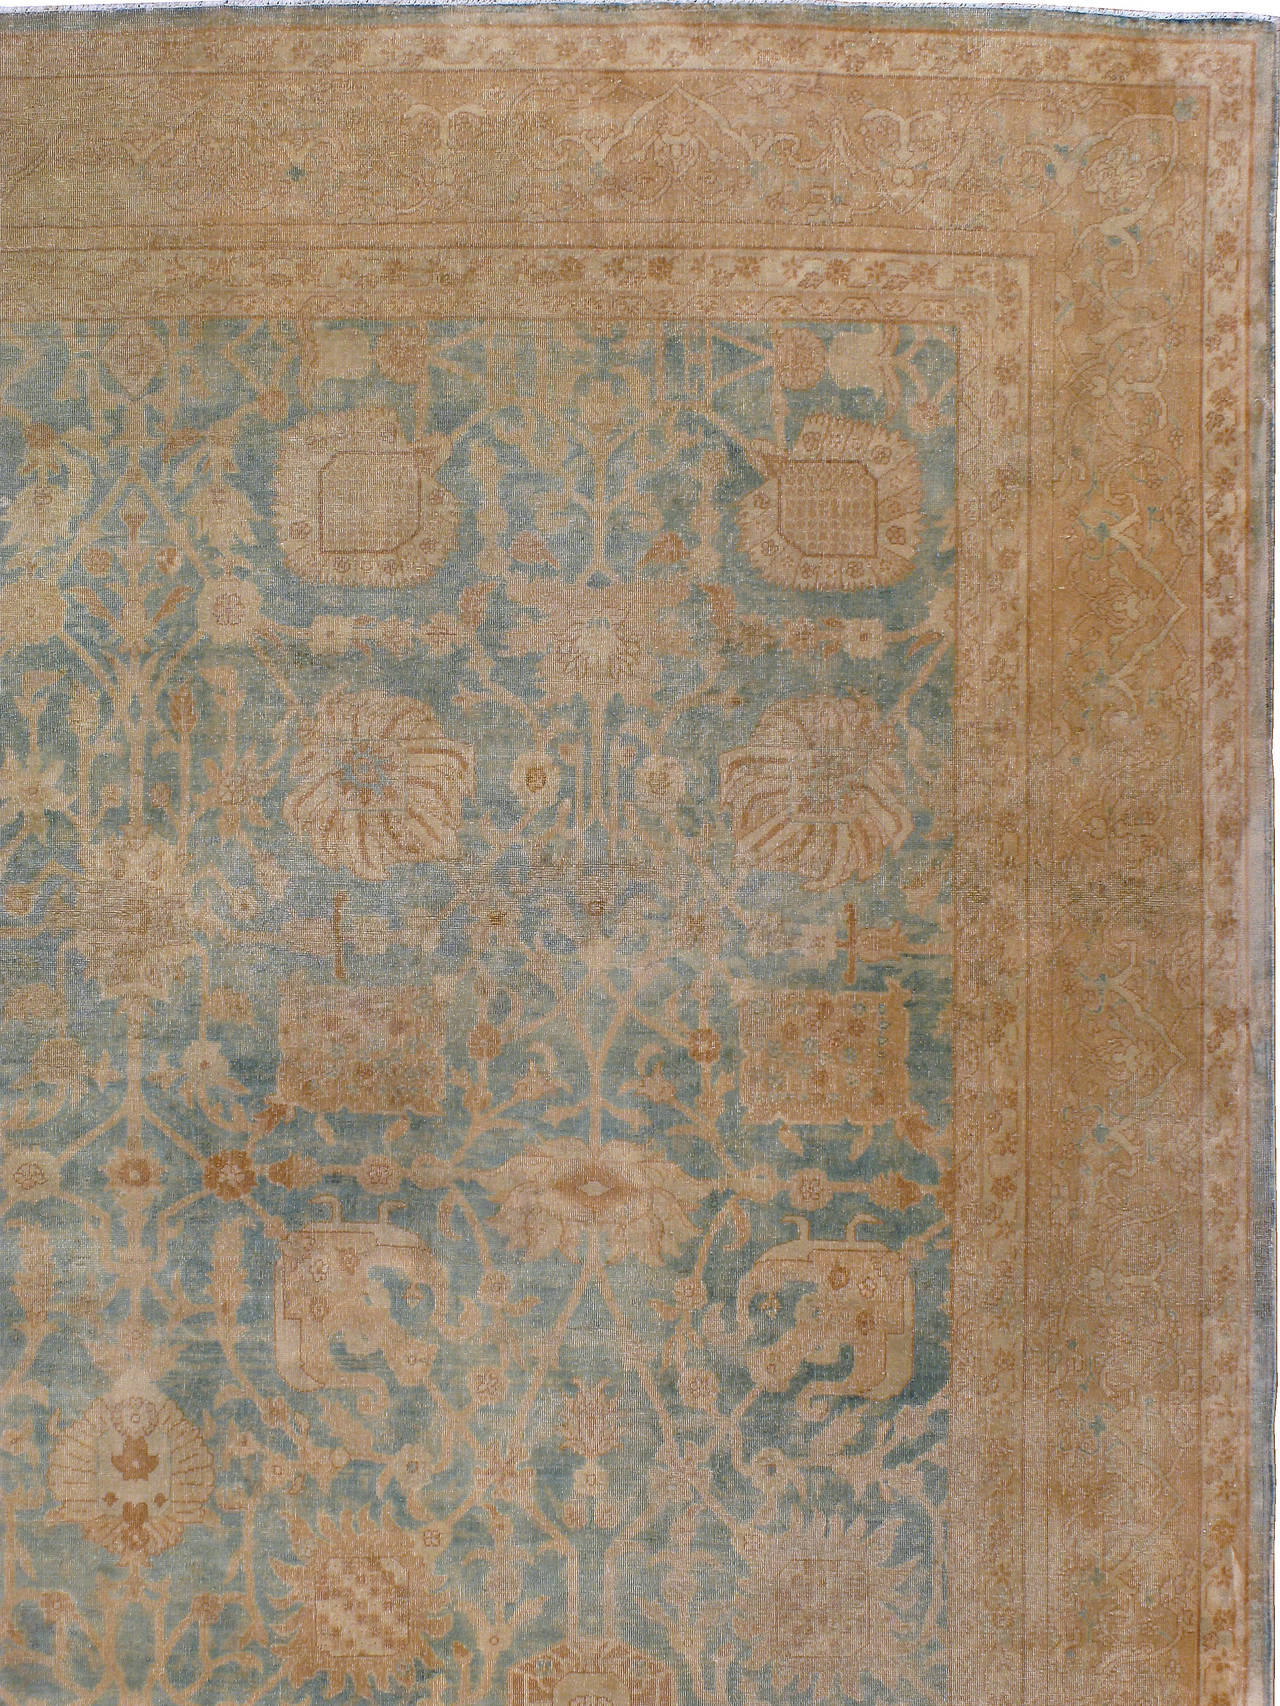 Hand-Woven Antique Indian Lahore Rug